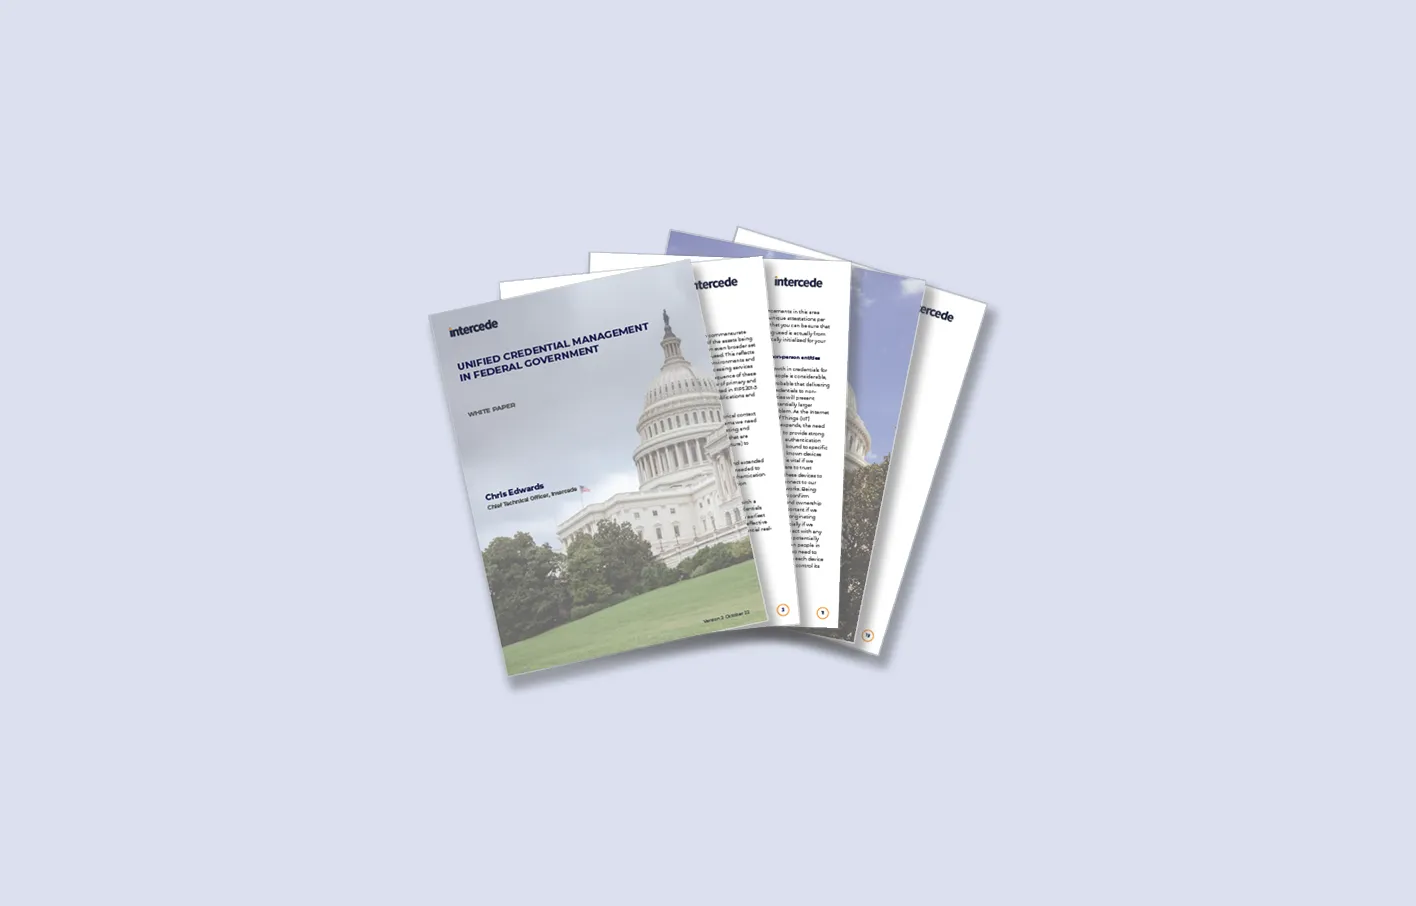 Unified credential management in federal government